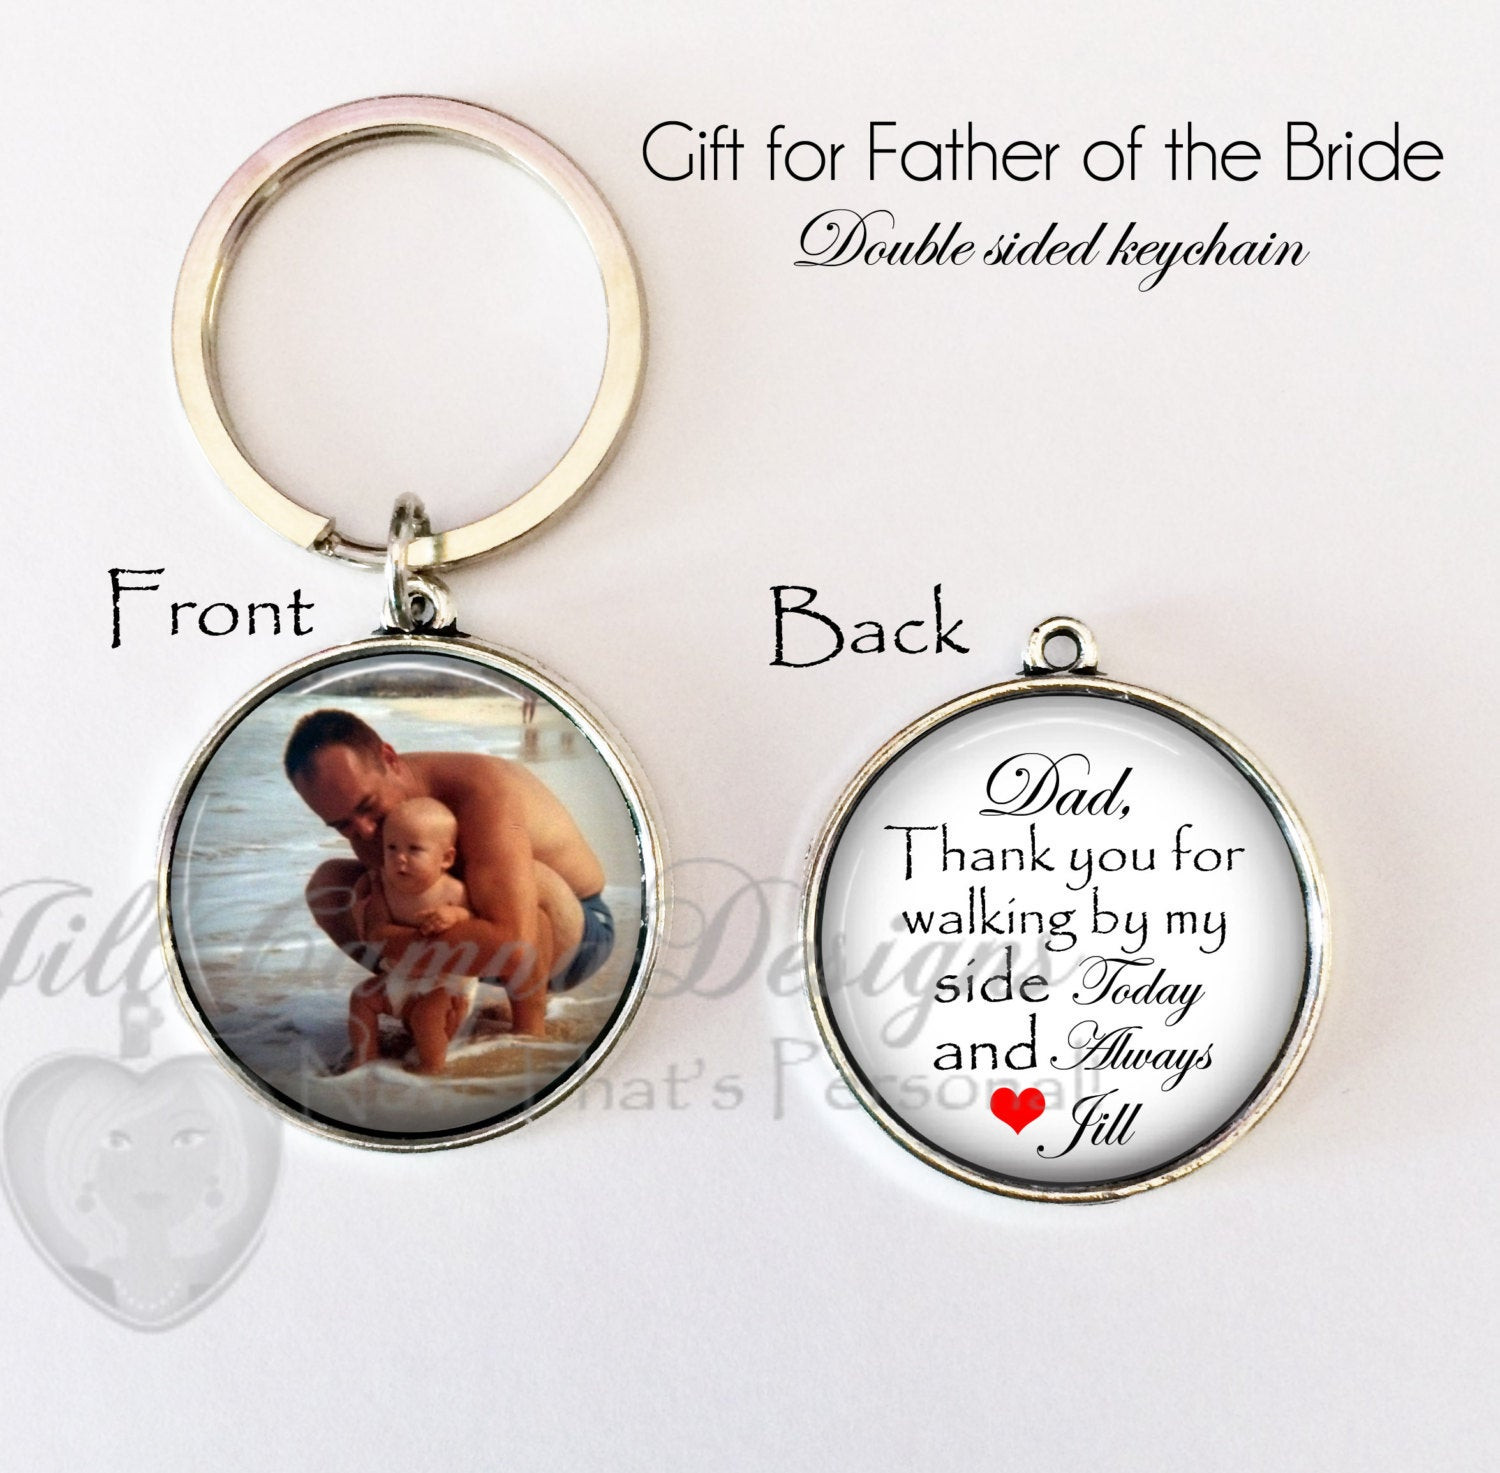 Father Of Bride Gift Ideas
 FATHER of the BRIDE GIFT Wedding day t for Dad